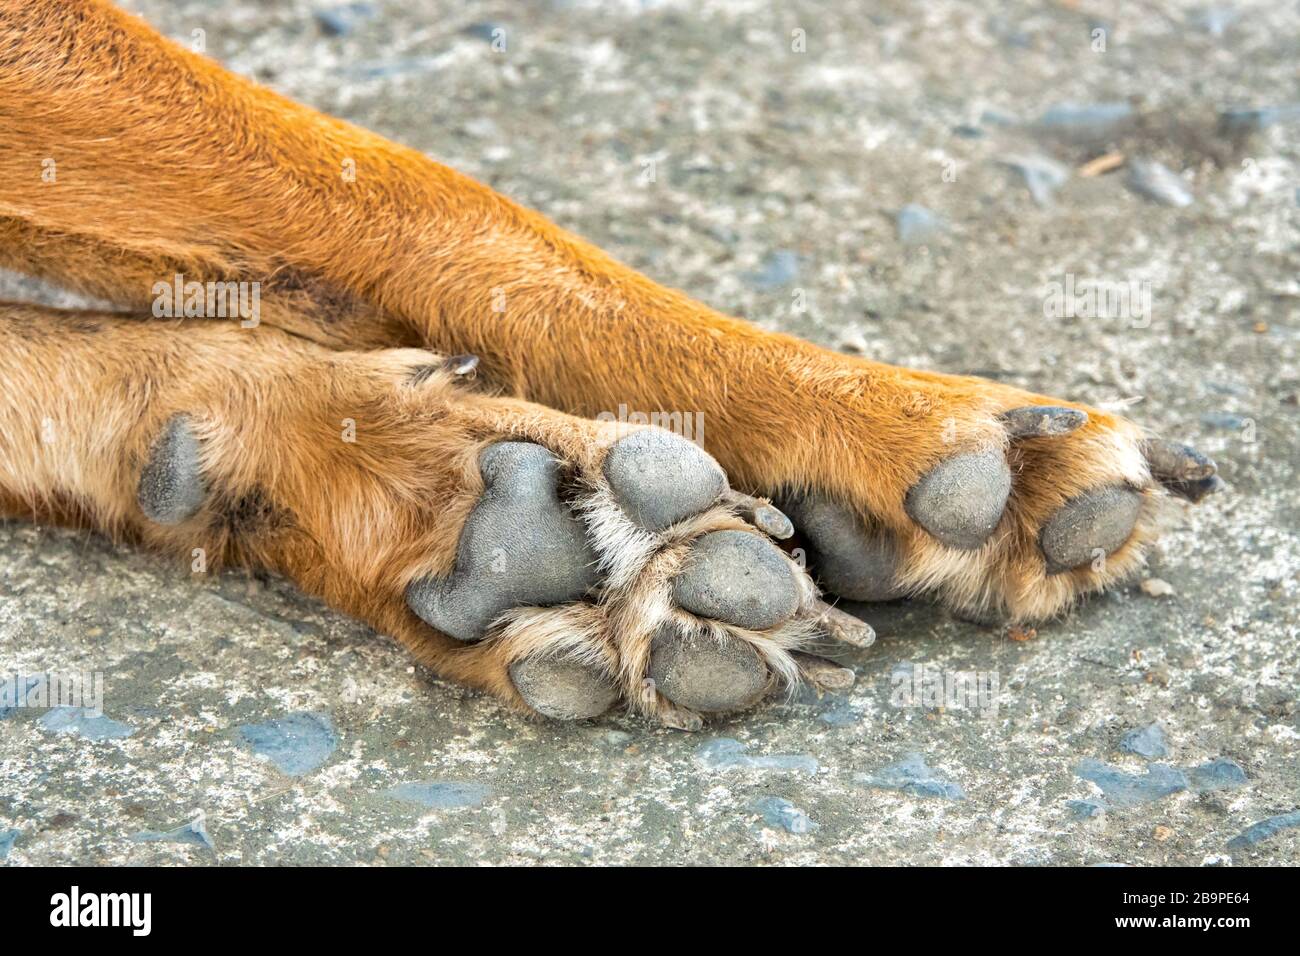 Close up shot of a dog’s front paws Stock Photo